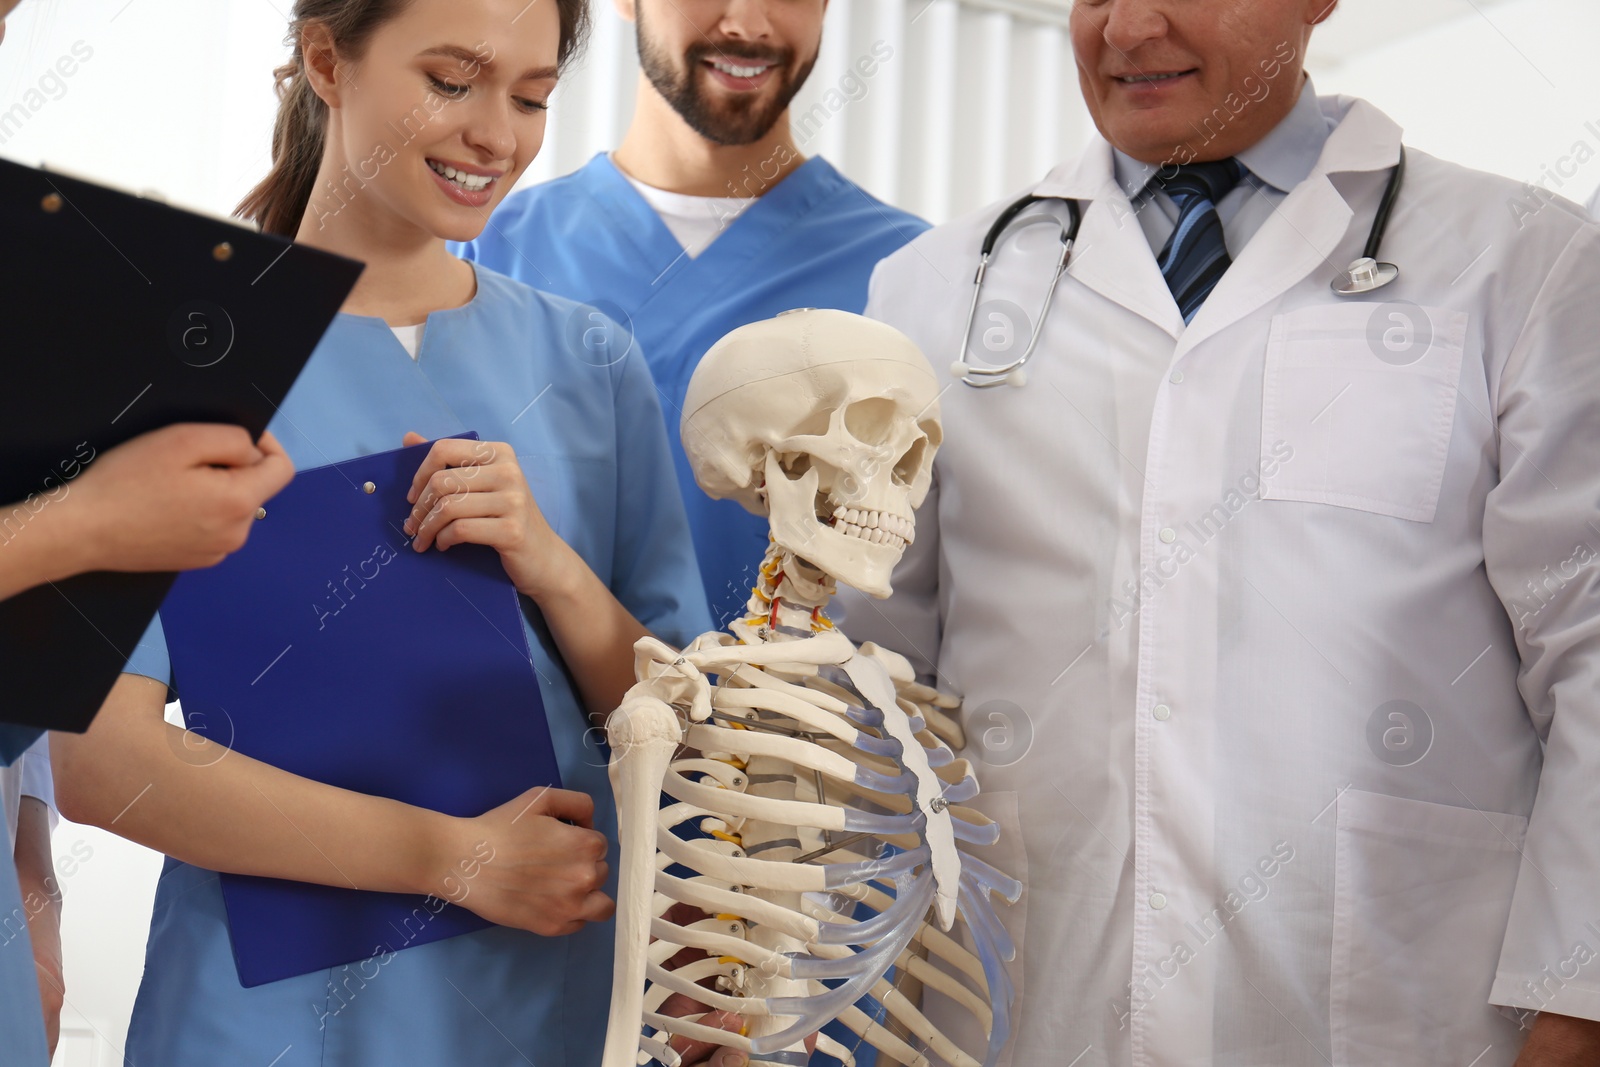 Photo of Professional orthopedist with human skeleton model teaching medical students in clinic